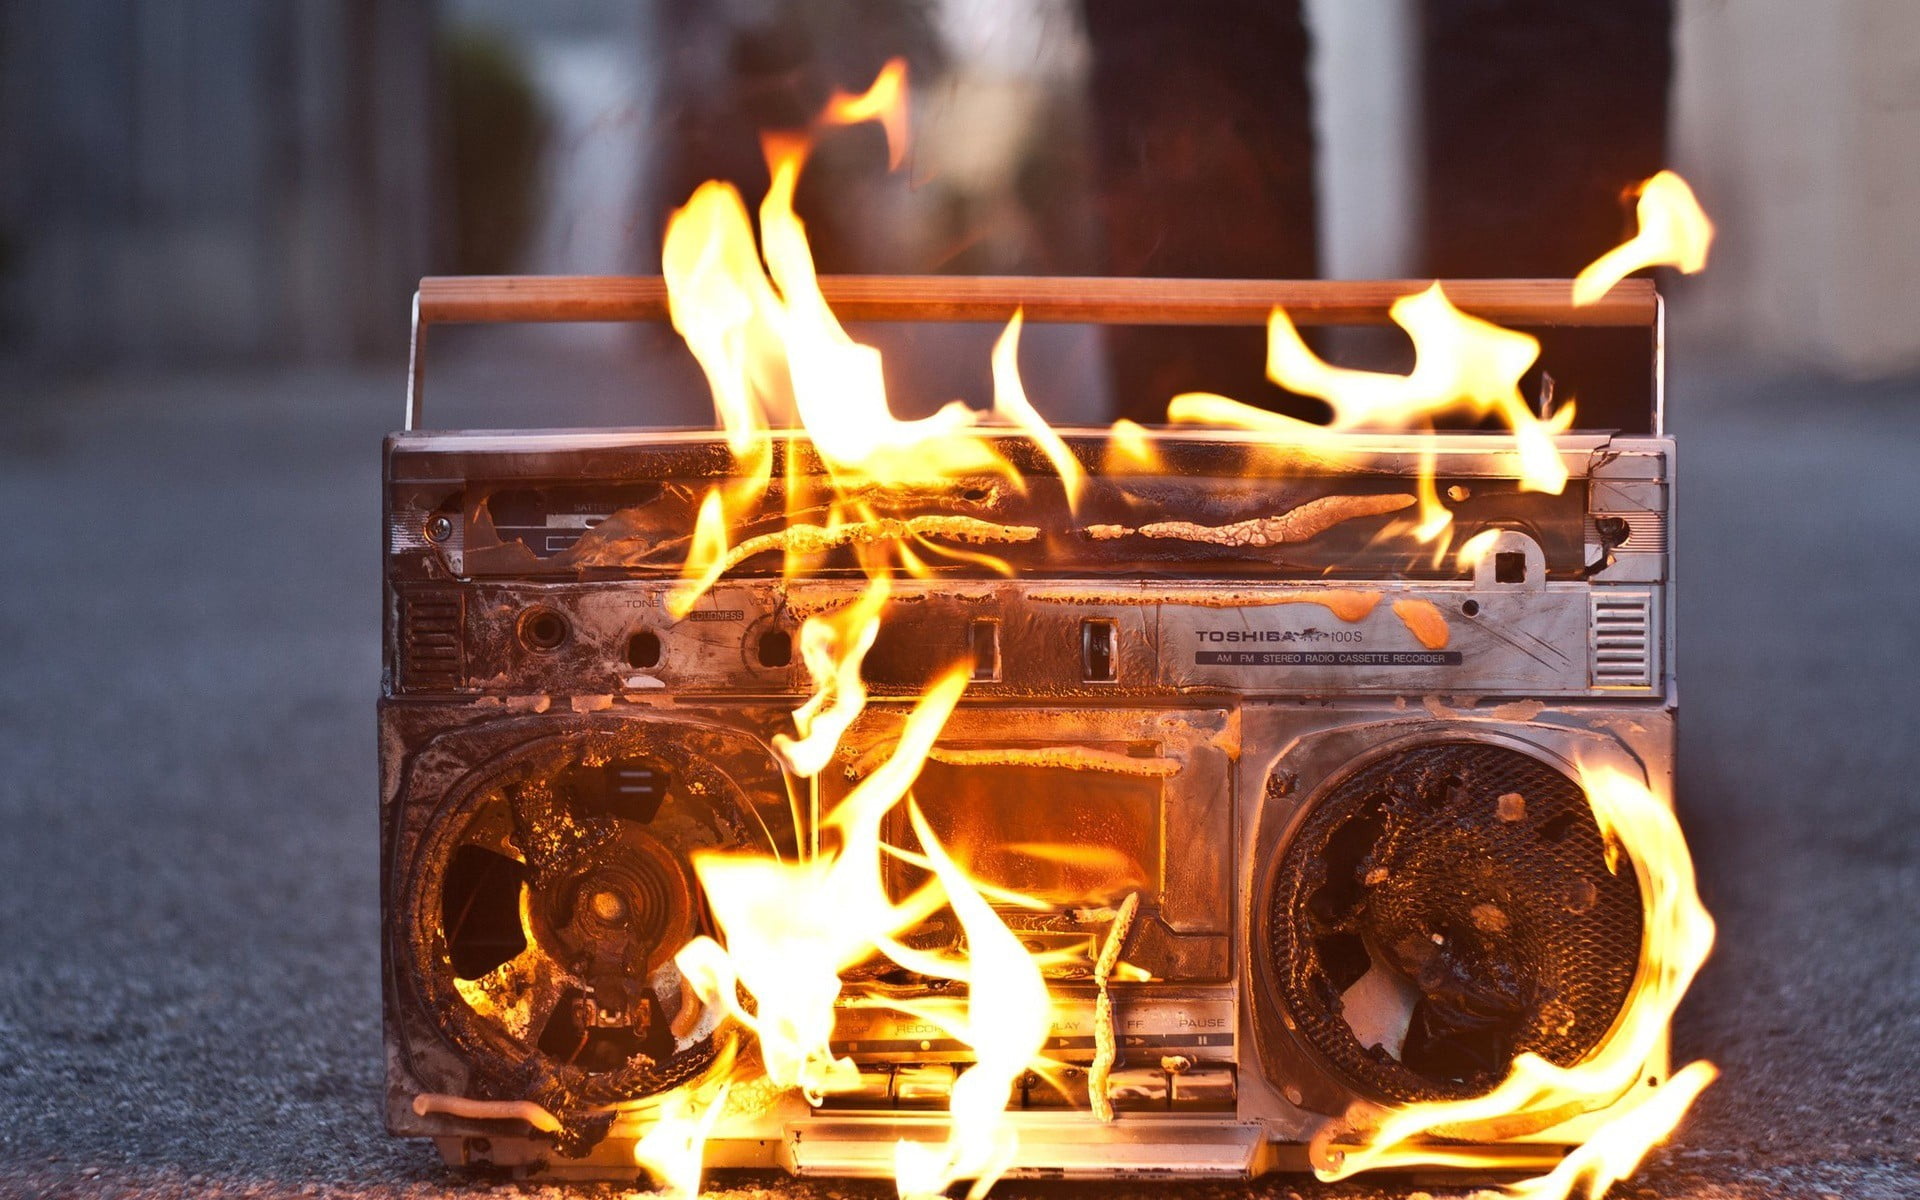 gray boombox on flame, fire, music, stereos, melting